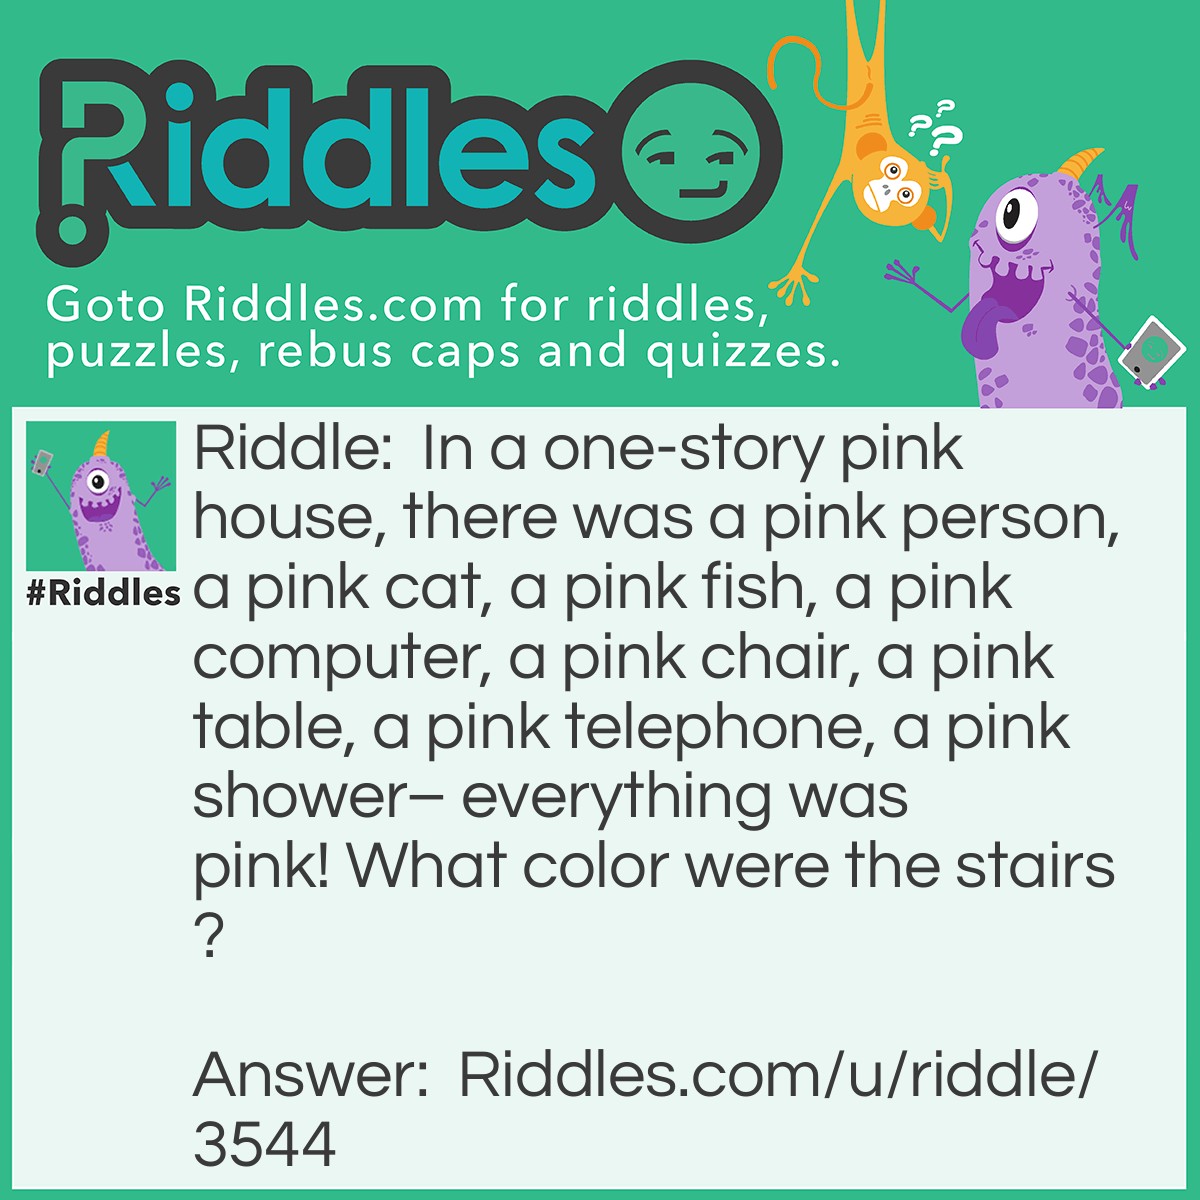 Riddle: In a one-story pink house, there was a pink person, a pink cat, a pink fish, a pink computer, a pink chair, a pink table, a pink telephone, a pink shower- everything was pink! What color were the stairs? Answer: There weren’t any stairs, it was a one story house.